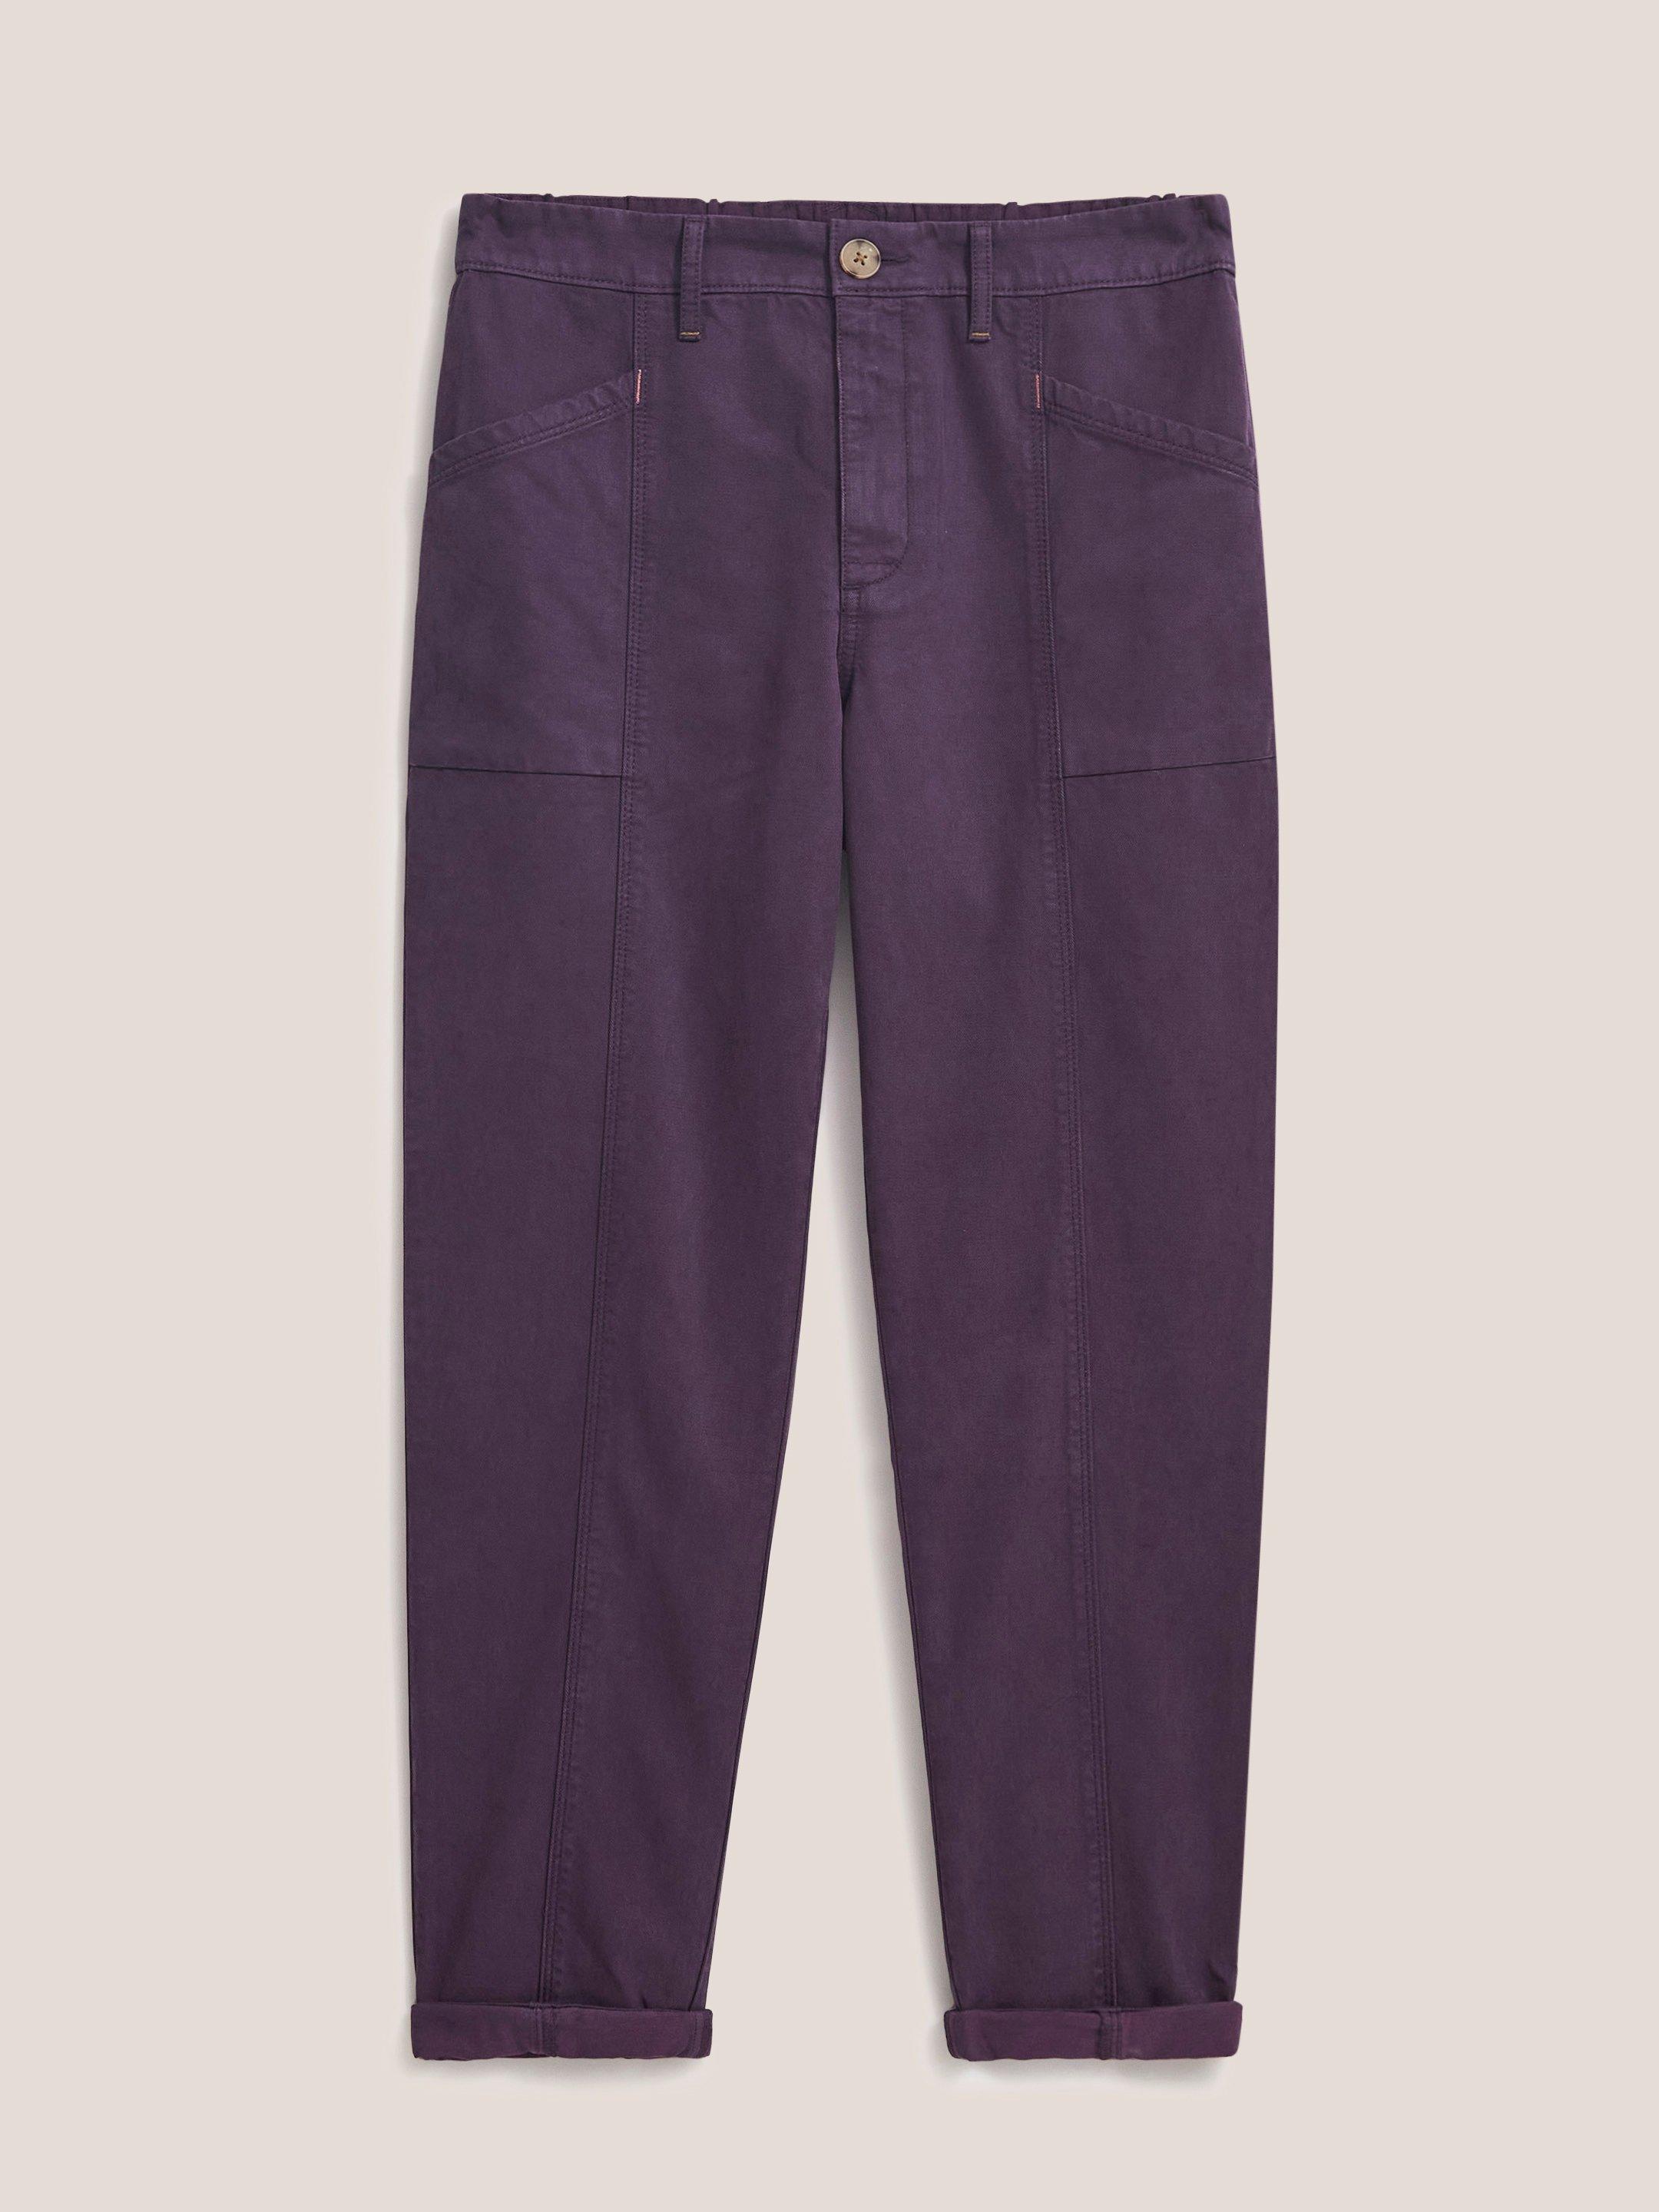 Thea Tapered Trouser in DK PURPLE - FLAT FRONT